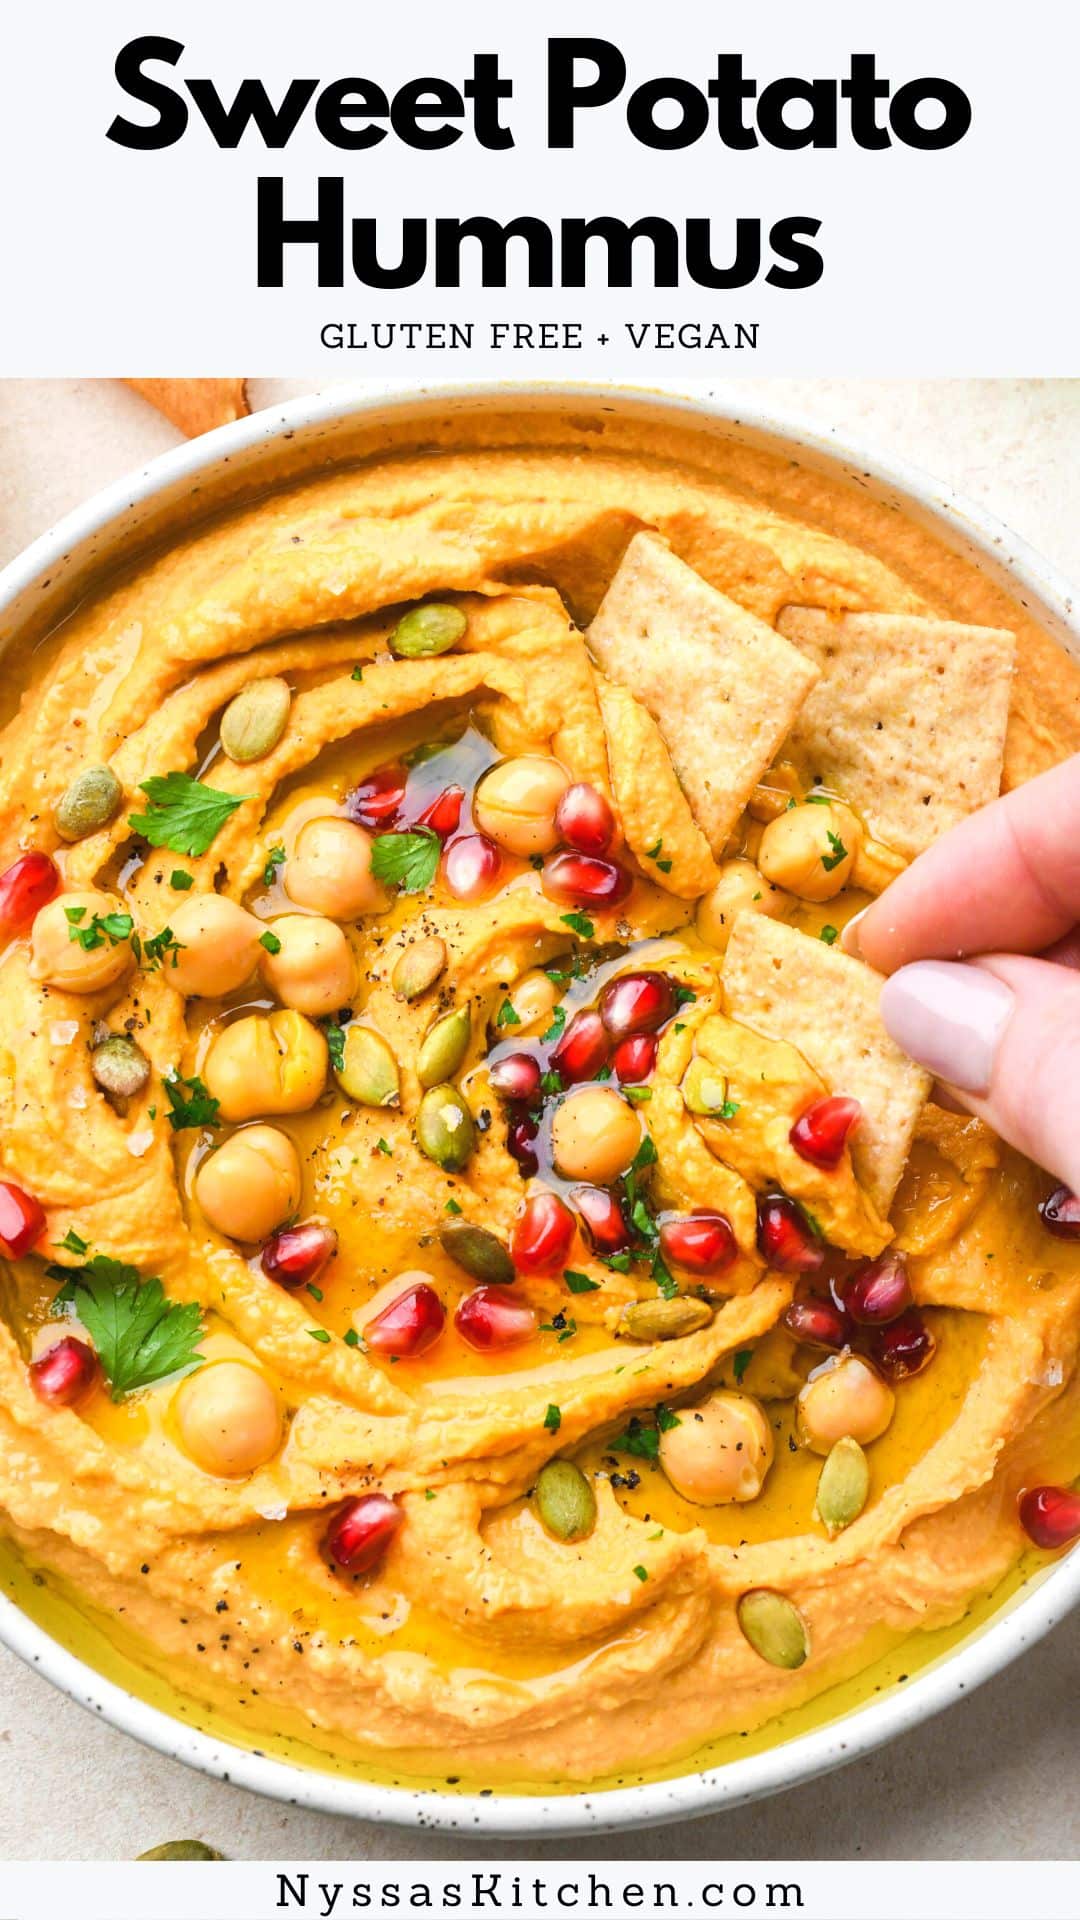 Sweet potato hummus is an extra yummy seasonal twist on a classic hummus recipe that makes the best healthy snack or appetizer for your next get together (or weekly meal prep)! Made with chickpeas, roasted sweet potatoes, a blend of flavorful spices, tahini, and lemon juice. A perfect snack for dipping your favorite crackers and veggies. Gluten free, vegan, dairy free.